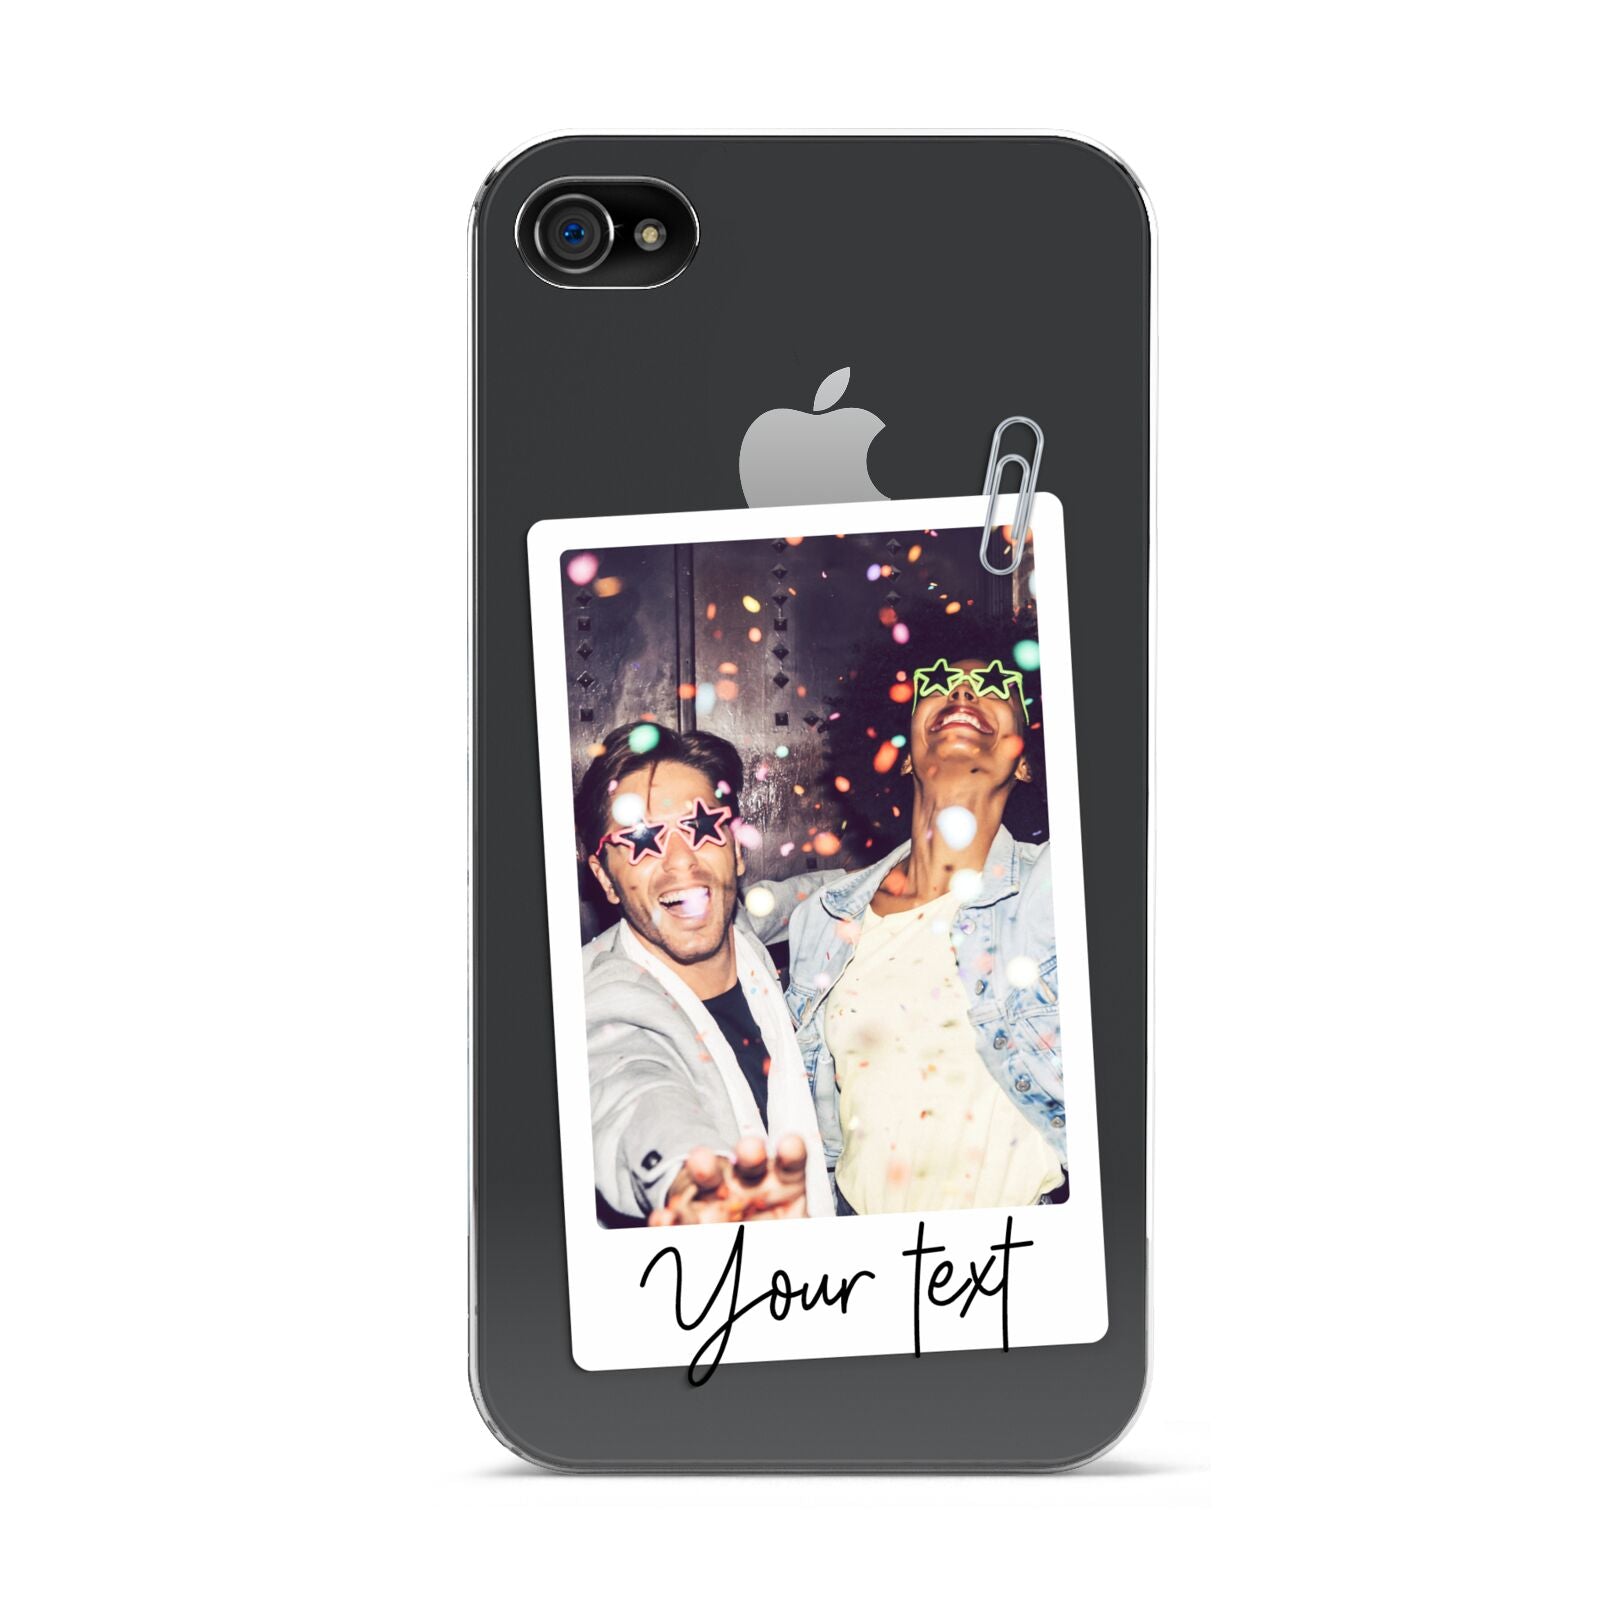 Personalised Photo with Text Apple iPhone 4s Case